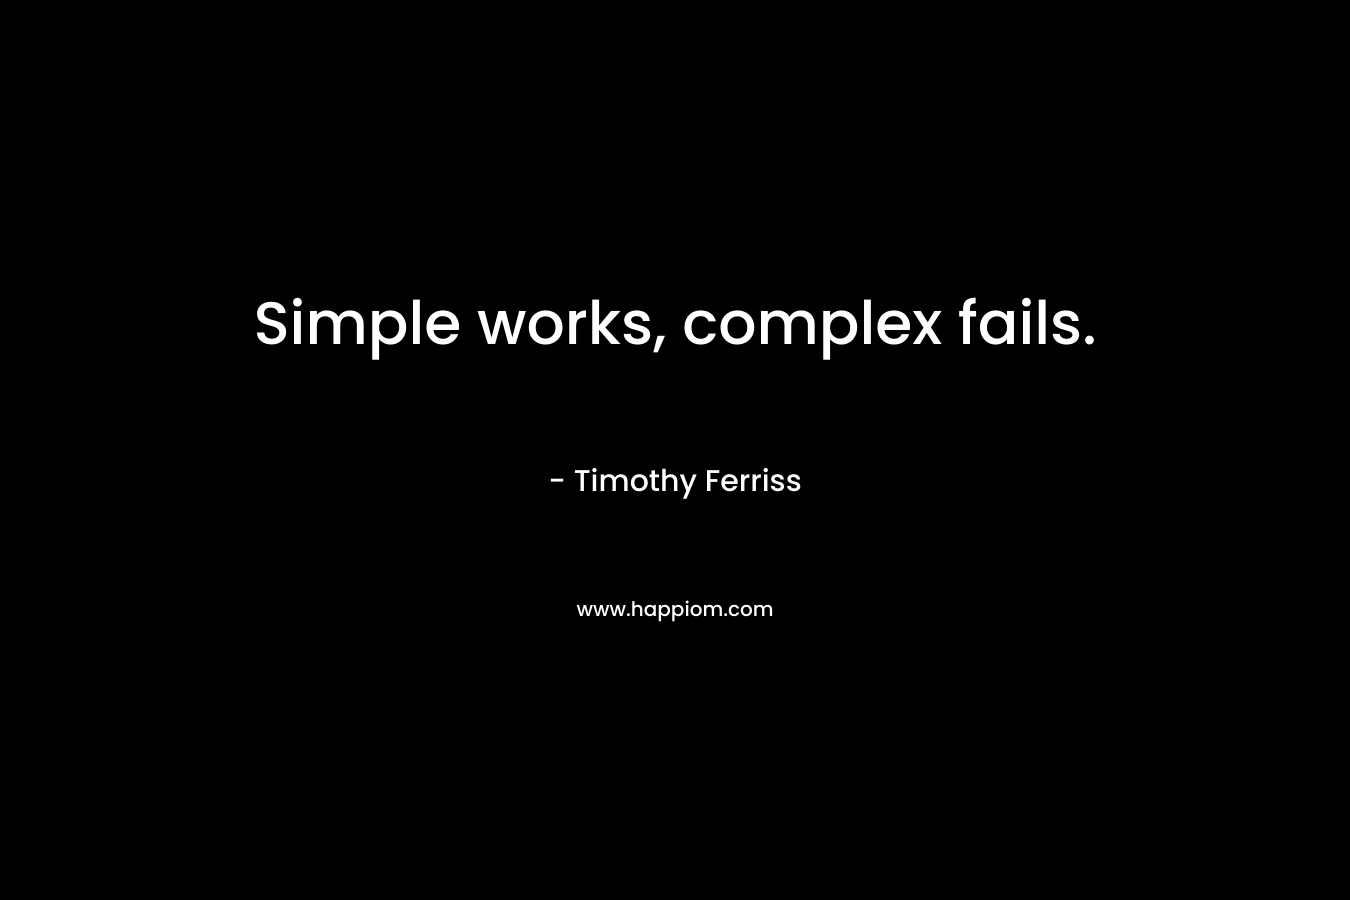 Simple works, complex fails.